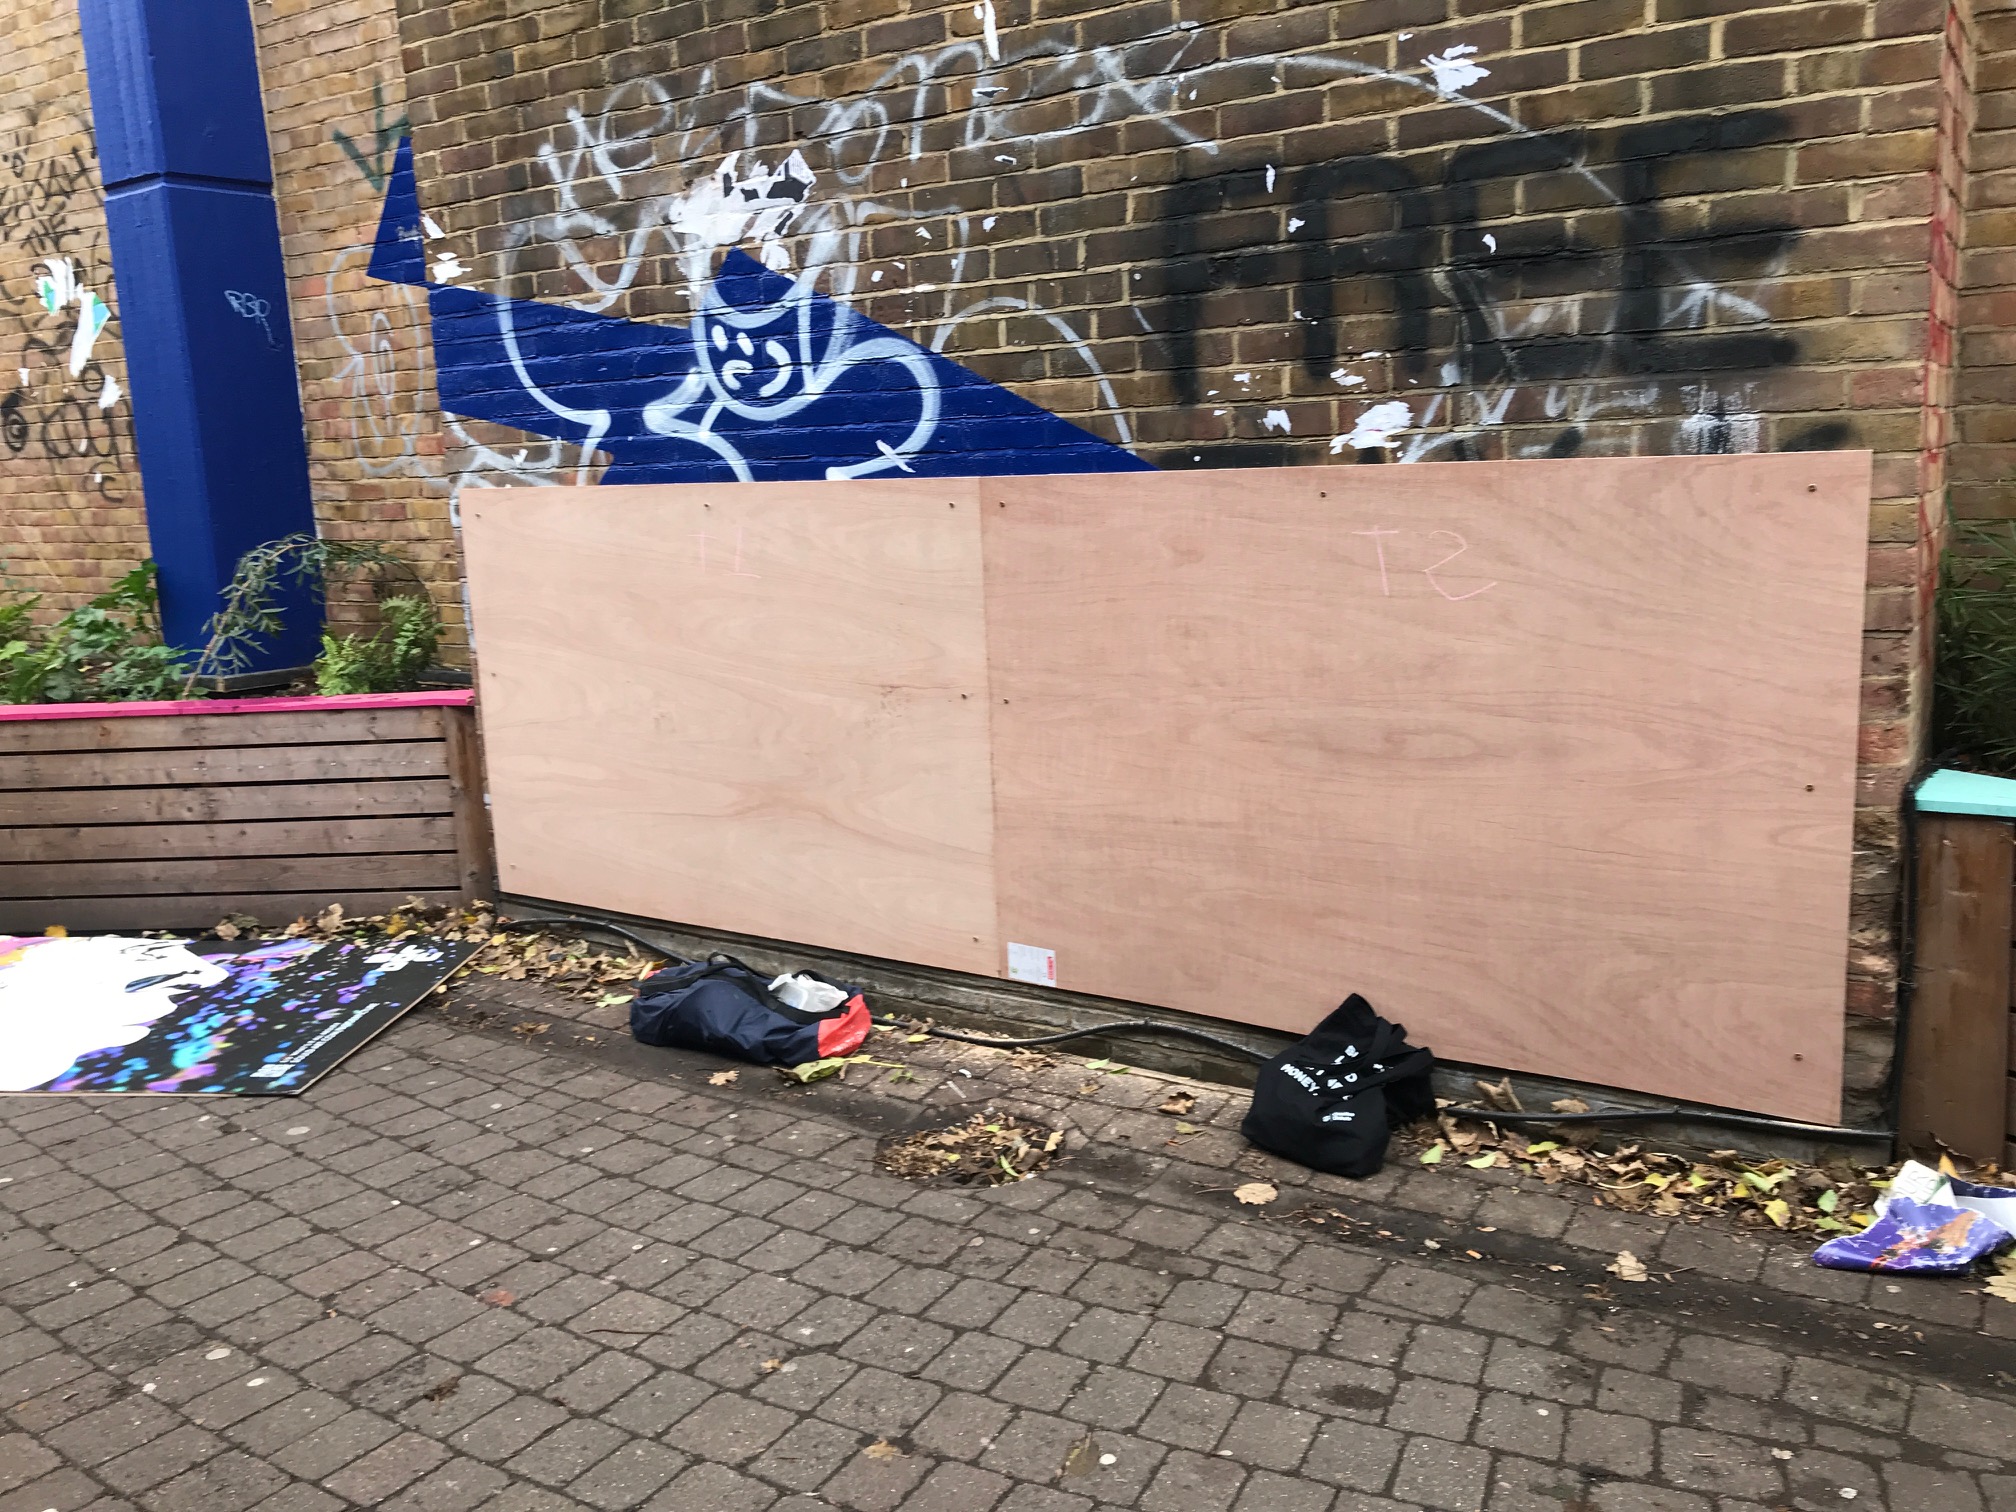 Three SoulD Art pieces, spanning over 12-foot square was revealed to replace the smaller jigsaw pieces dotted around Peckham, from the Bigger Picture art trail.